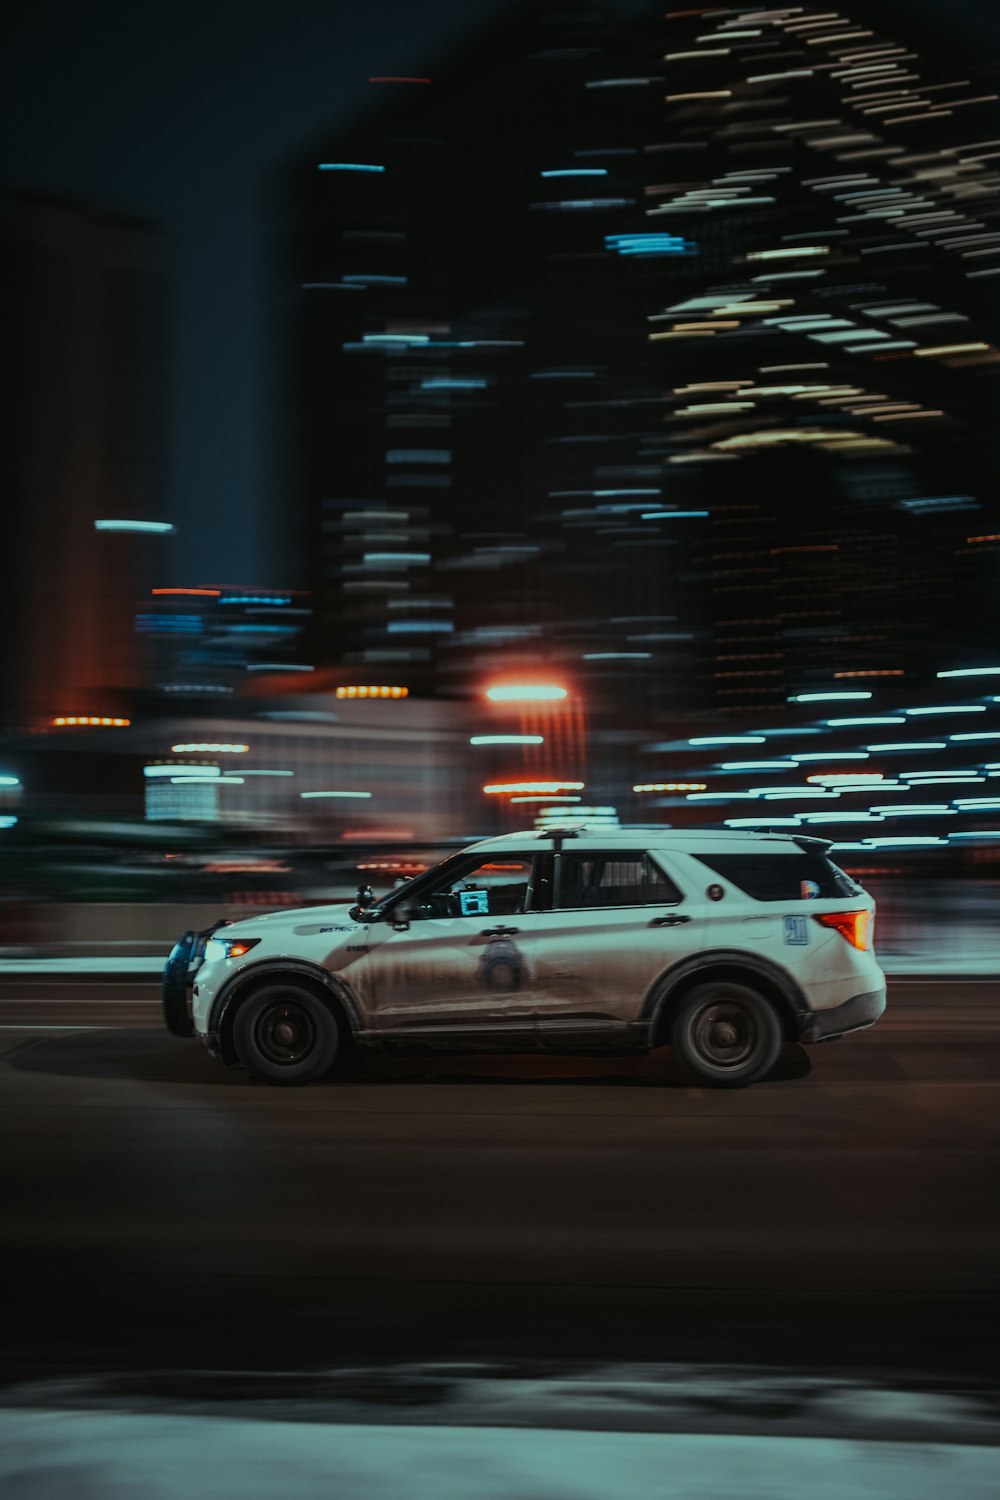 a police car driving down a city street at night